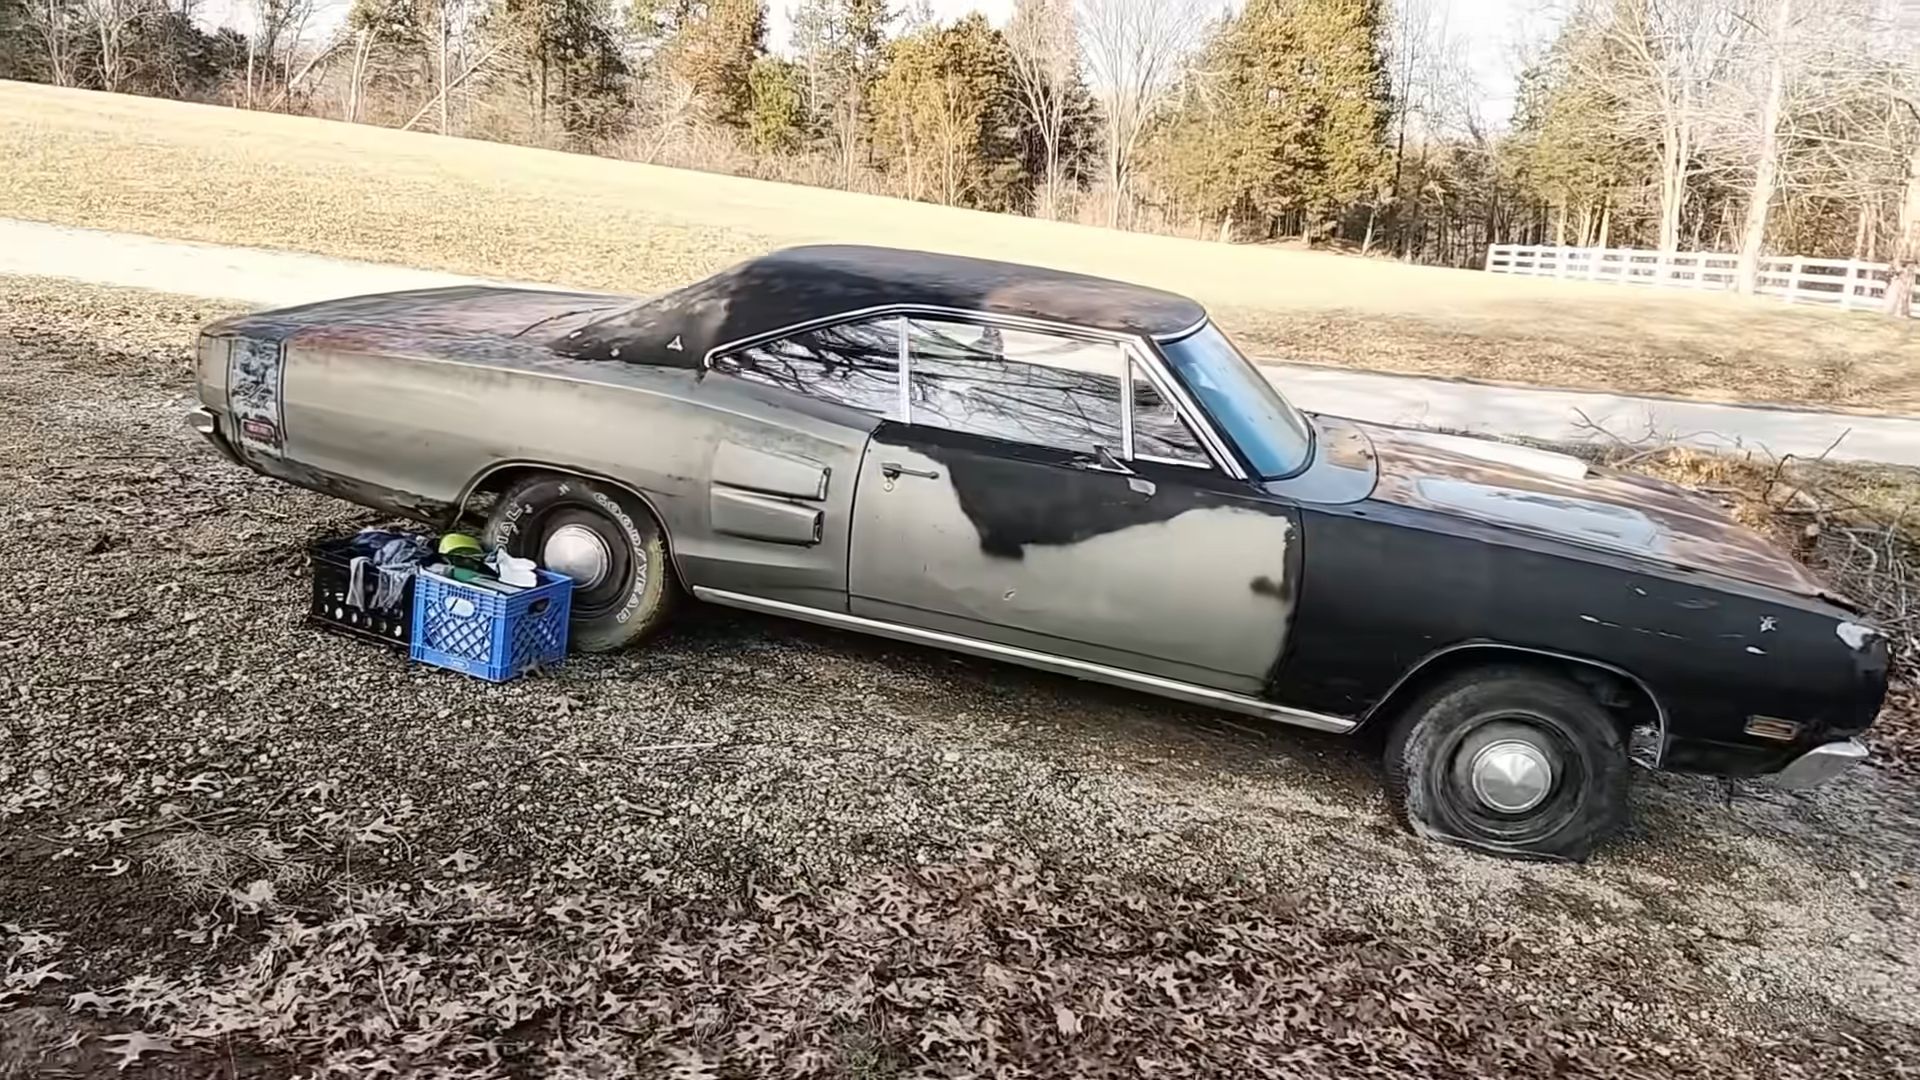 This Outstanding Mopar Ranch Hides A Rare And Wild Muscle Car